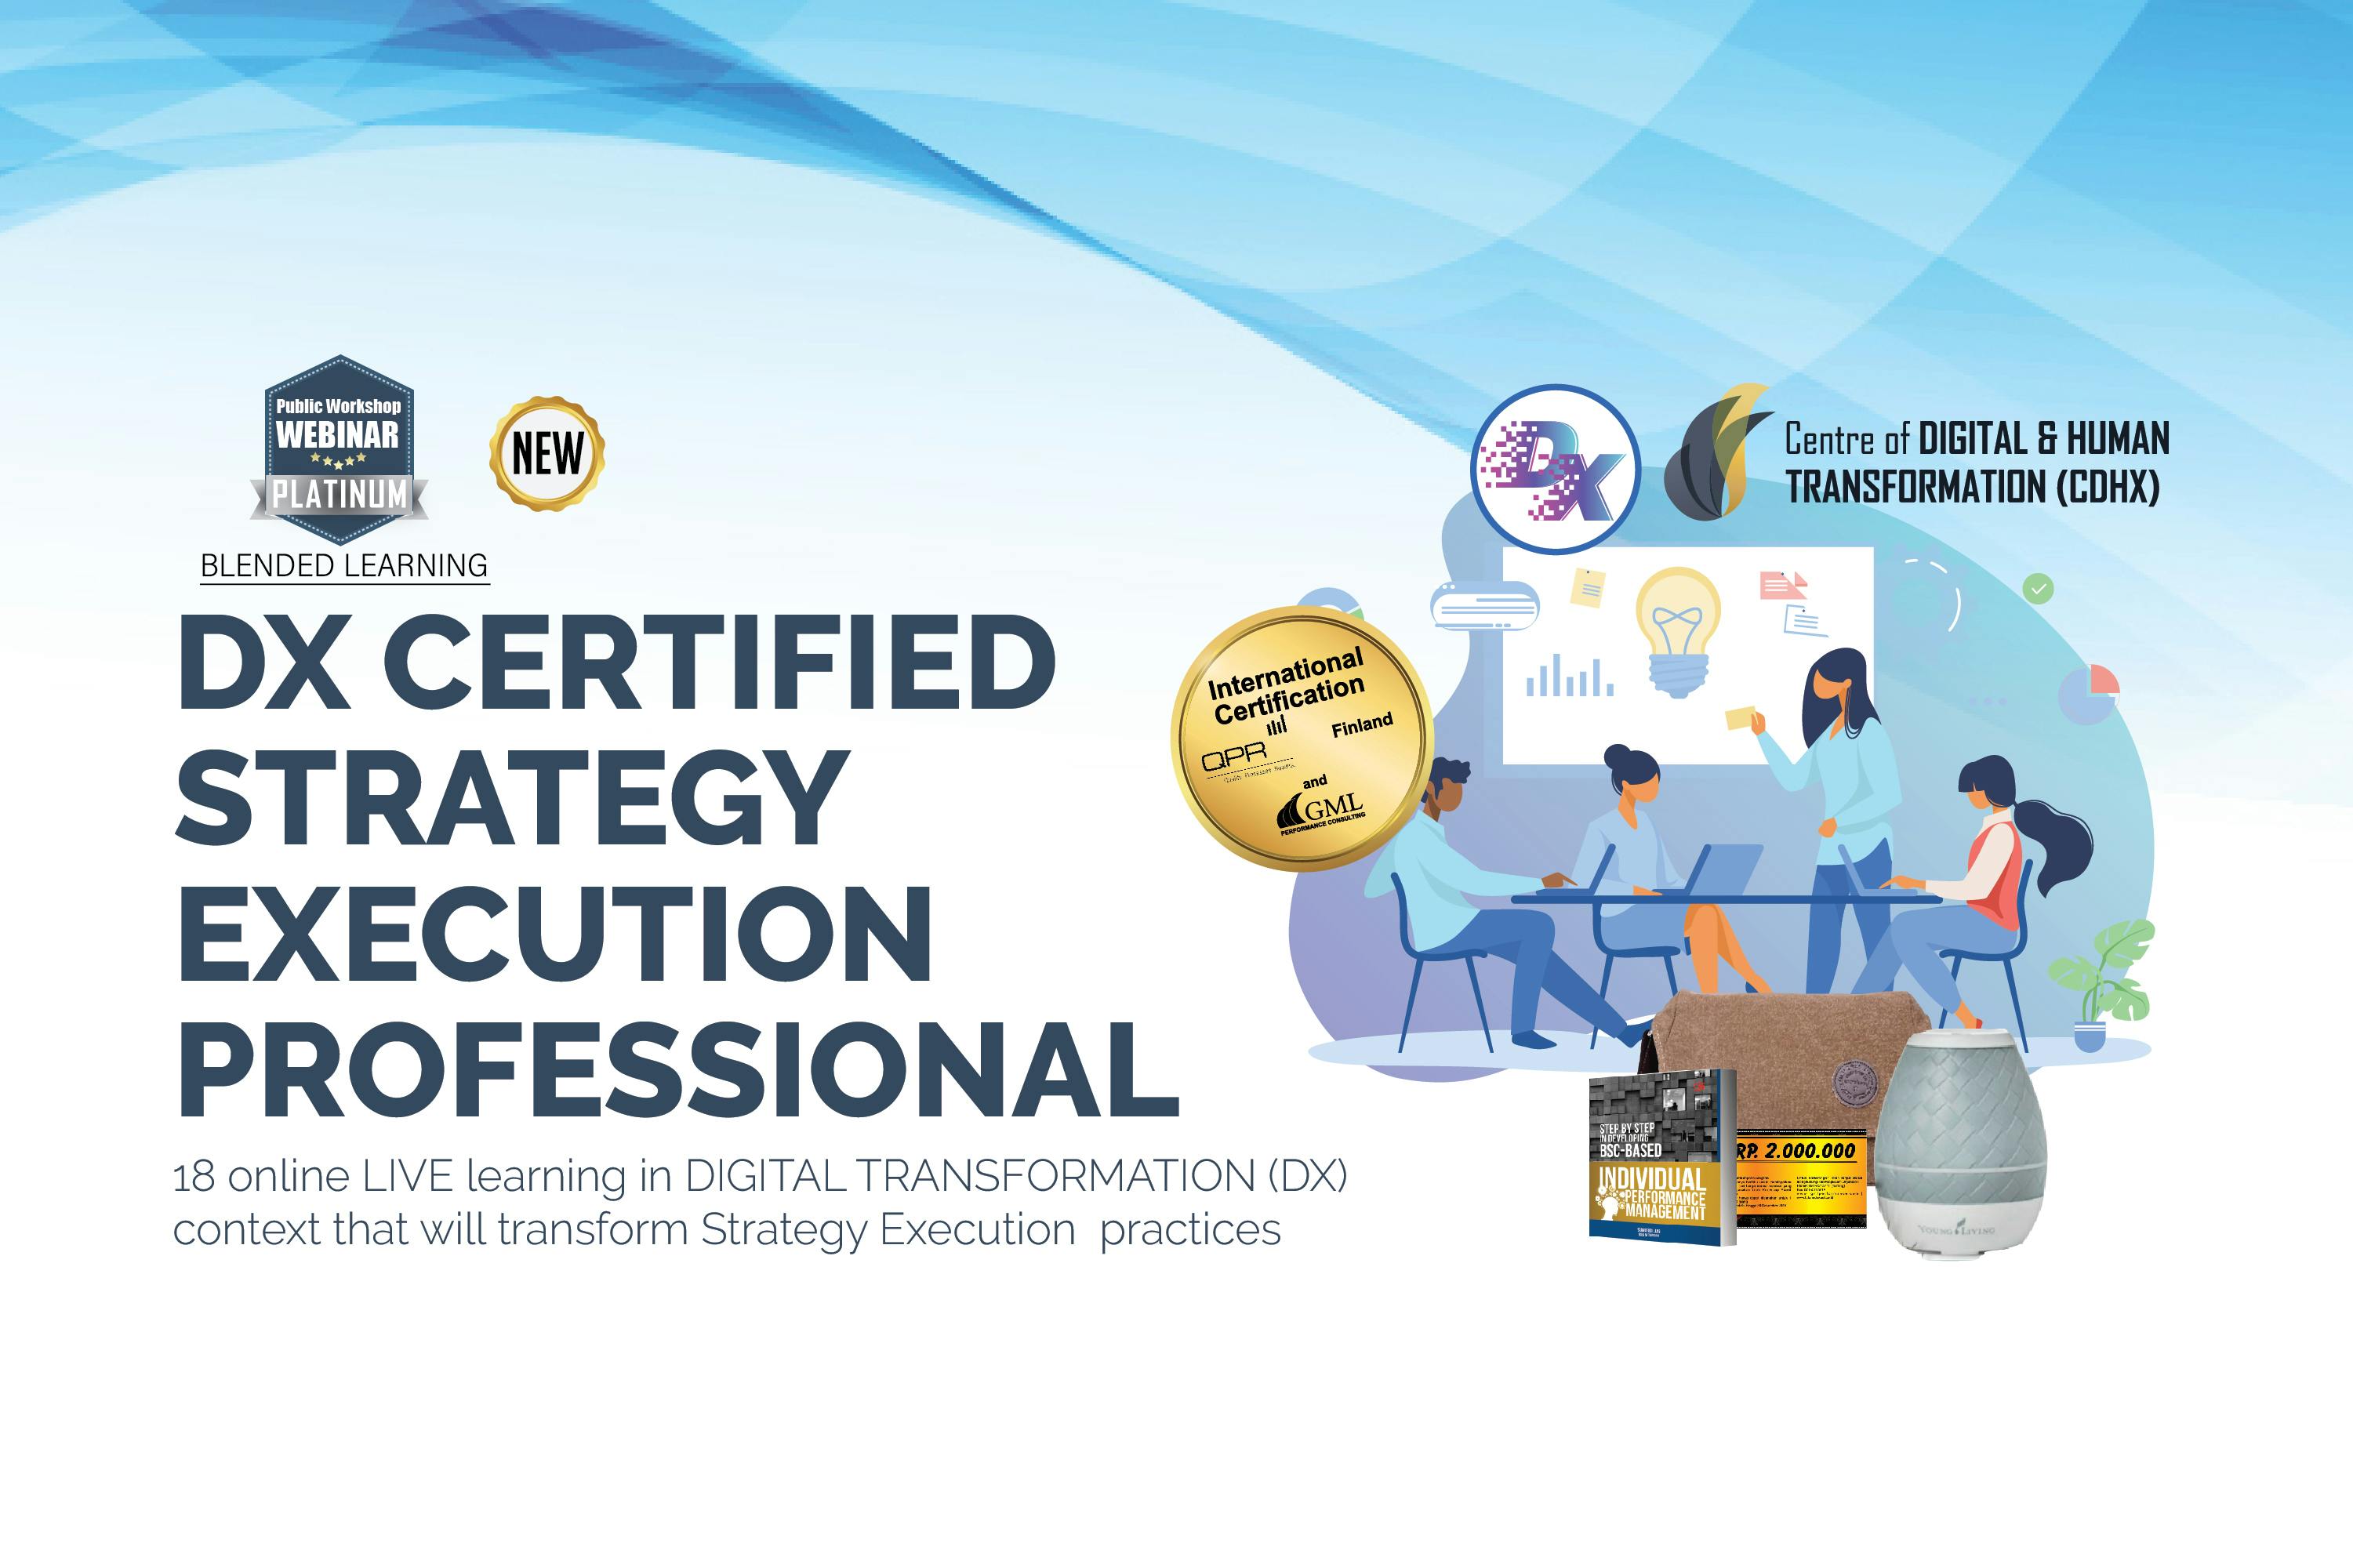 DX Certified Strategy Execution Professional (CSEP)